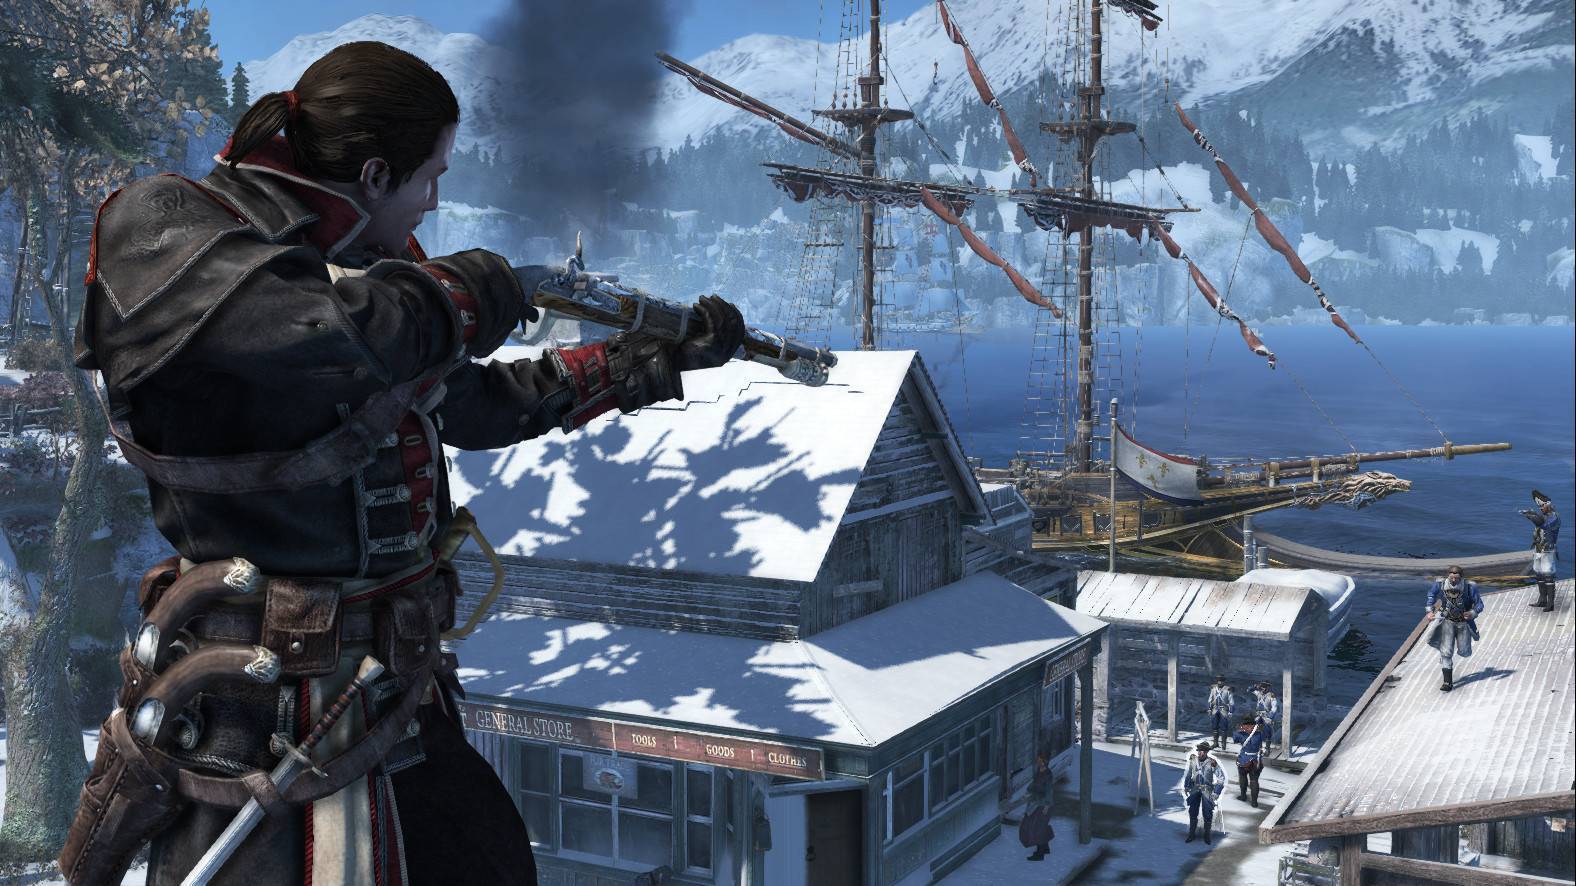 assassin's creed rogue xbox store